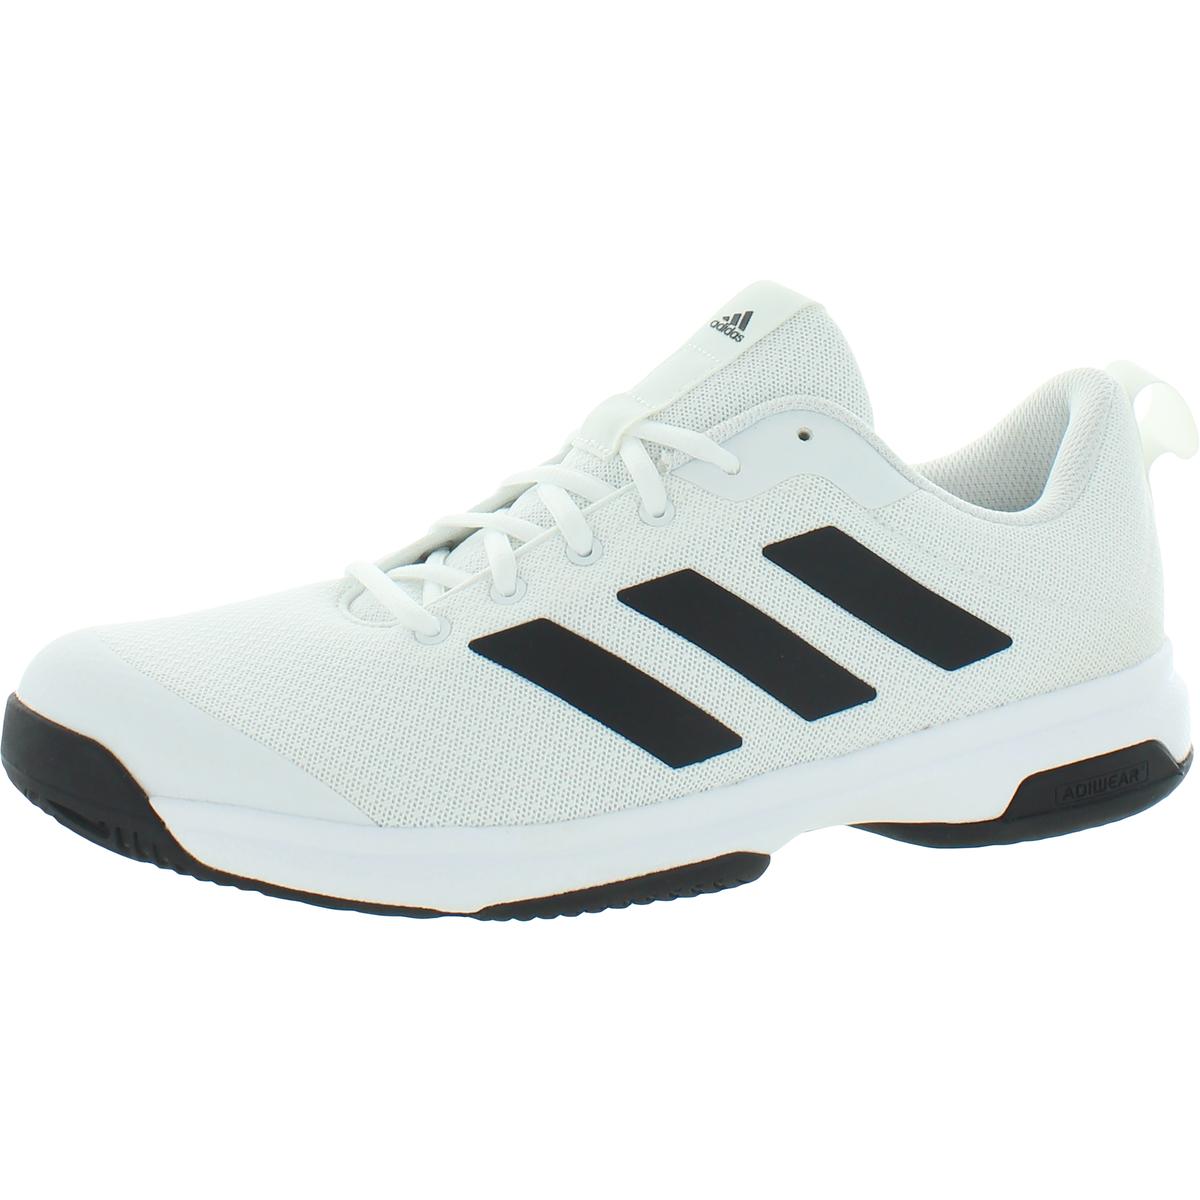 Adidas Game Spec Mens Fitness Athletic Tennis Shoes